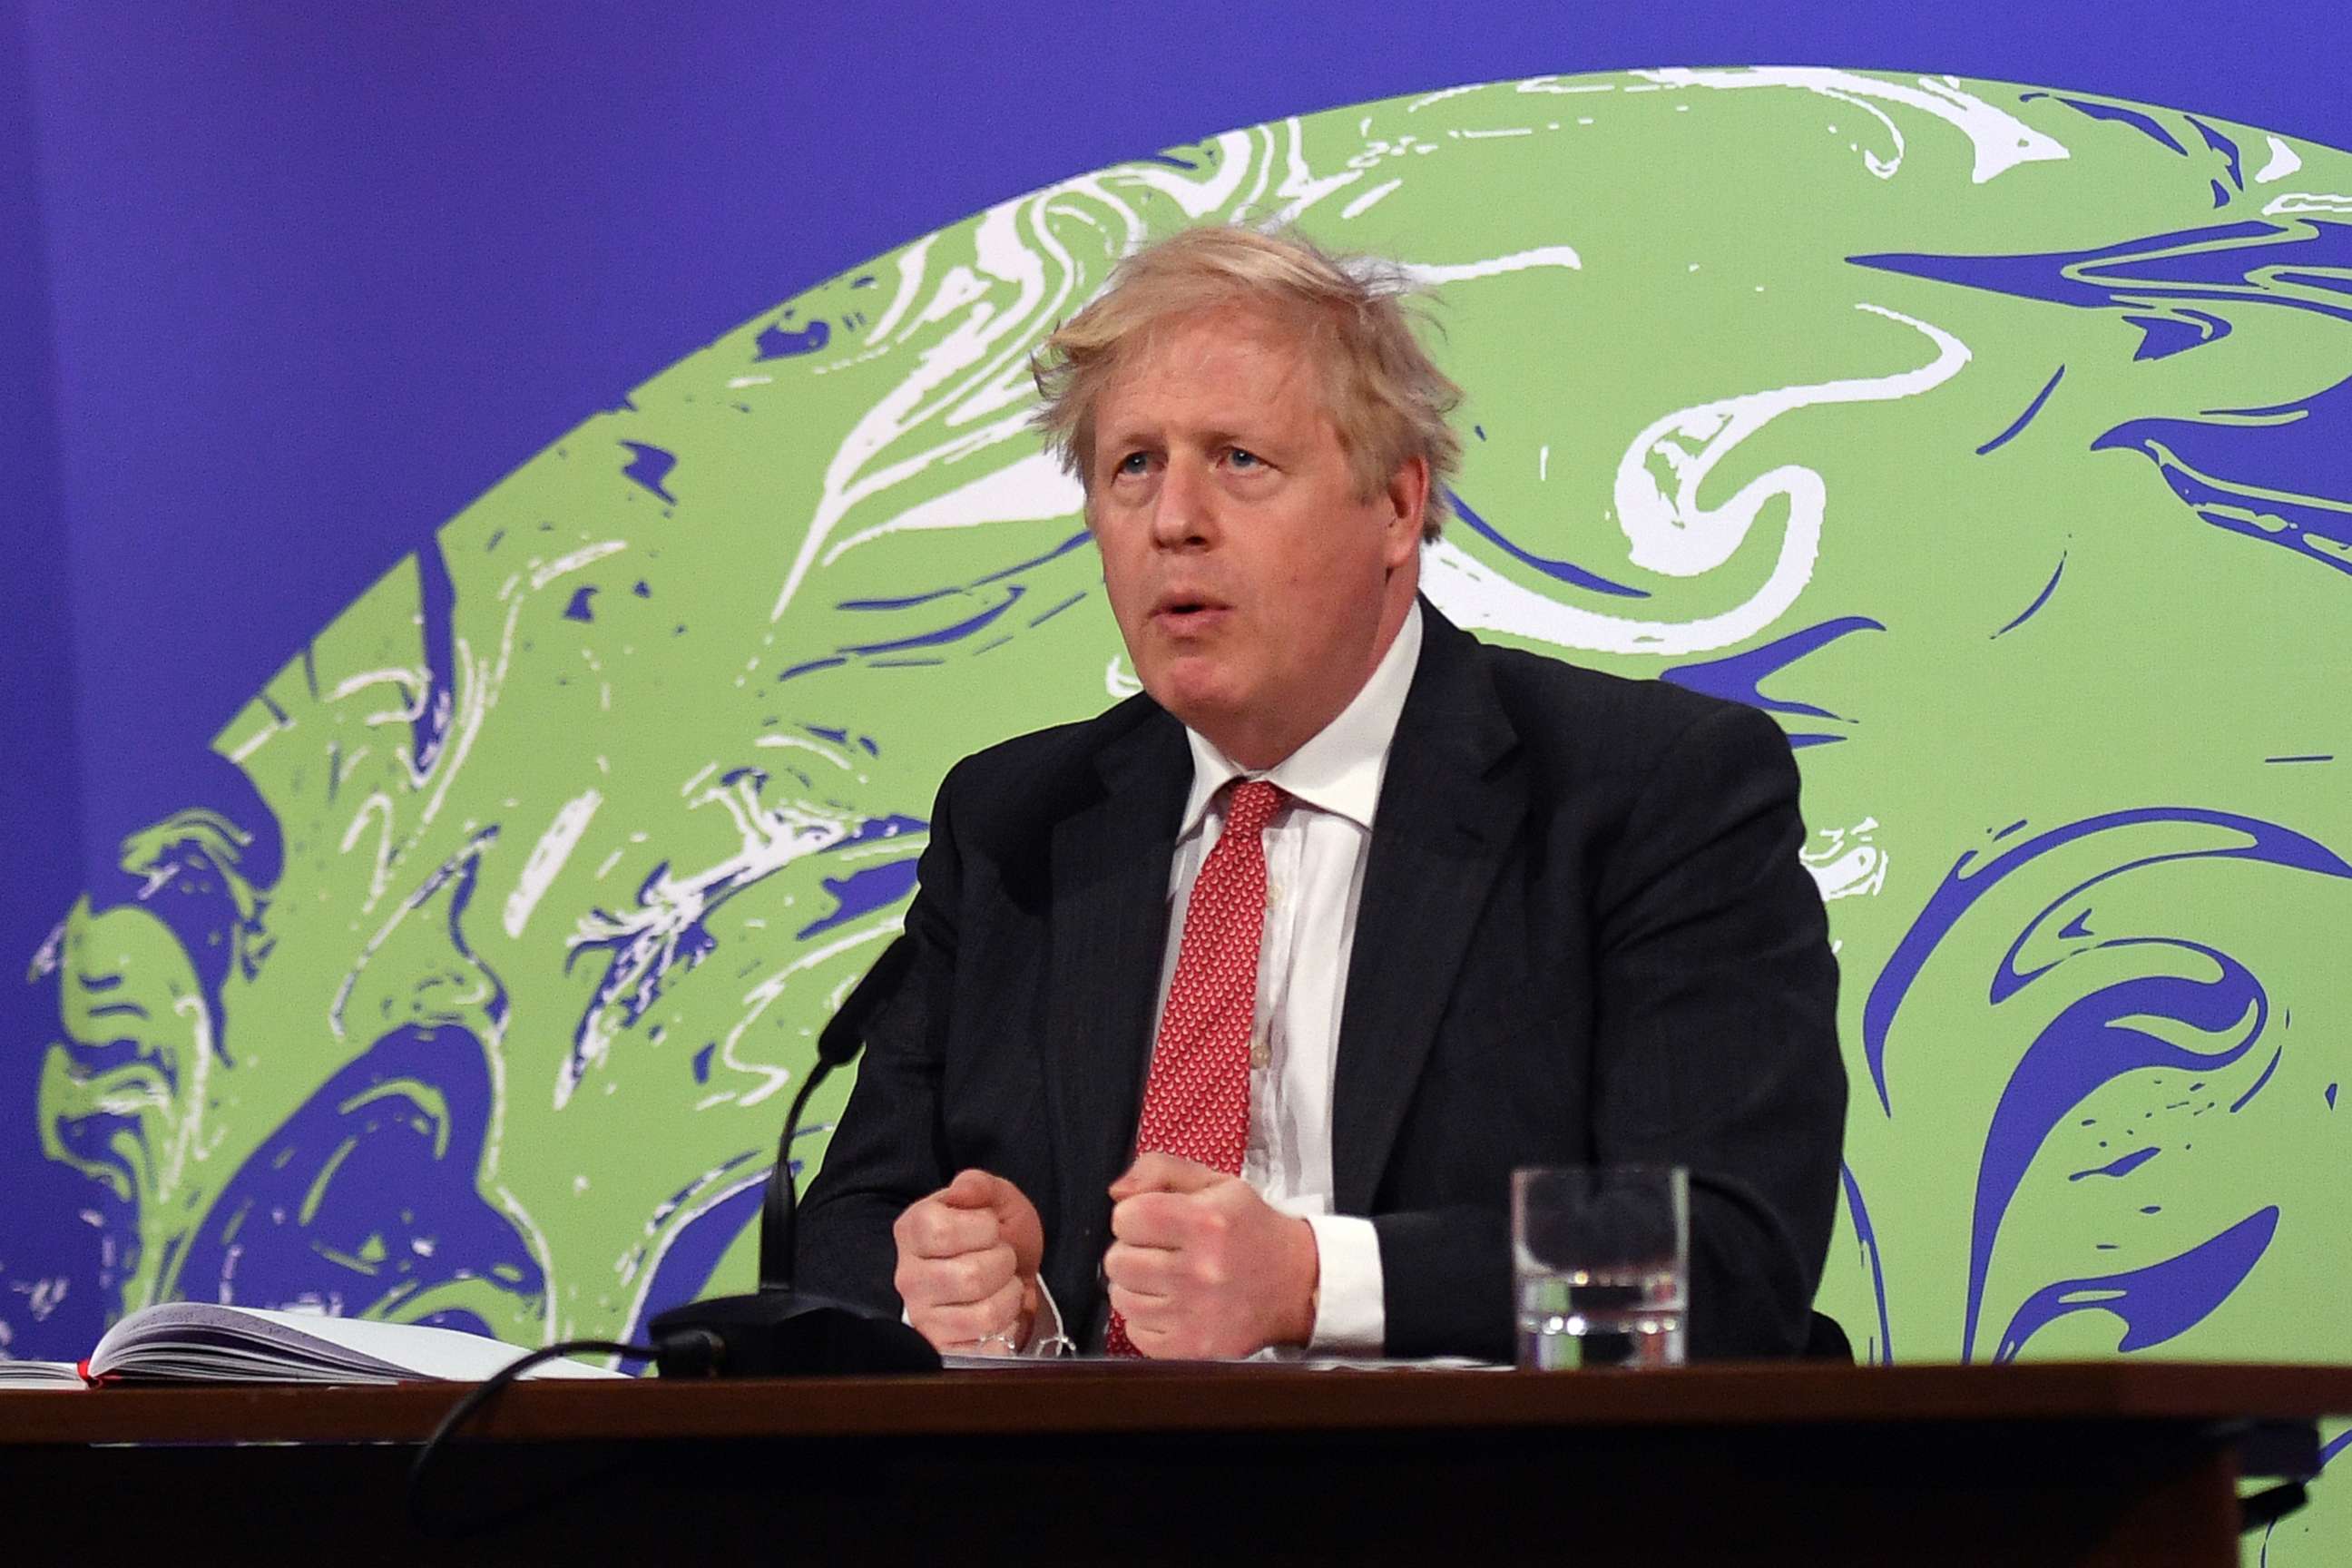 PHOTO: Britain's Prime Minister Boris Johnson speaks during the opening session of the virtual U.S Leaders Summit on Climate from the Downing Street Briefing Room on April 22, 2021 in London.